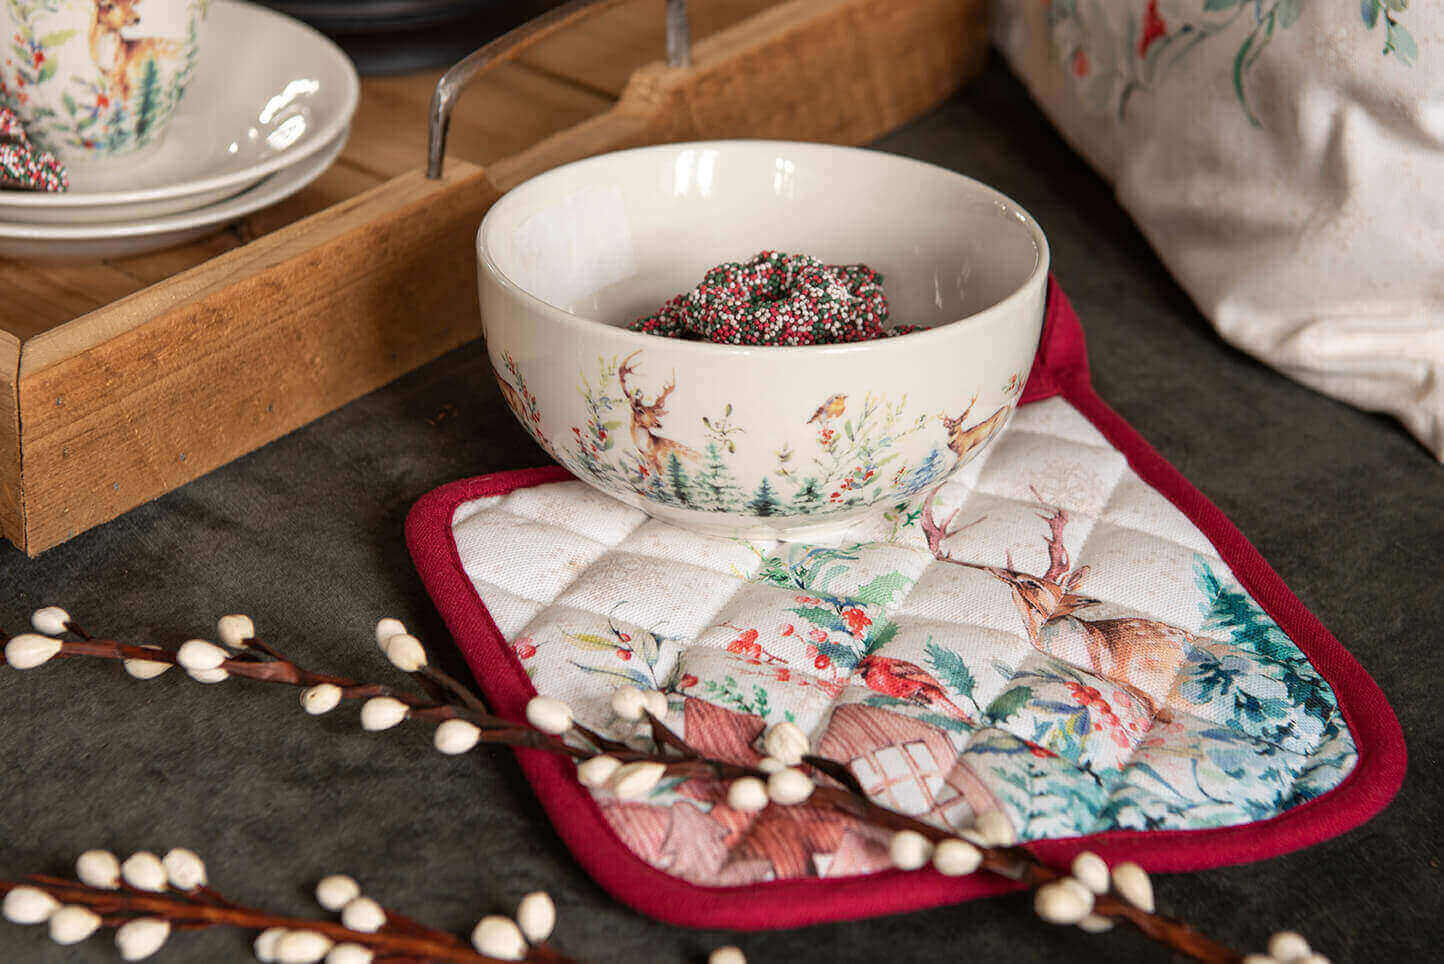 A festively set table with a focus on Christmas dinnerware. In the center sits a round bowl with a Christmas scene of deer and trees on the exterior, filled with what appears to be gingerbread or a similar festive treat. Underneath the bowl lies a pot holder with a similar rustic scene, bordered in red, adding to the Christmas atmosphere. In the background, we see more dinnerware with a matching design, likely part of a set. On the left side of the photo, there's a branch adorned with what appears to be cotton balls, giving a natural and wintry feel. In the top right corner of the photo, a portion of a fabric item with a Christmas pattern is visible. The overall ambiance exudes a cozy and homely Christmas atmosphere.